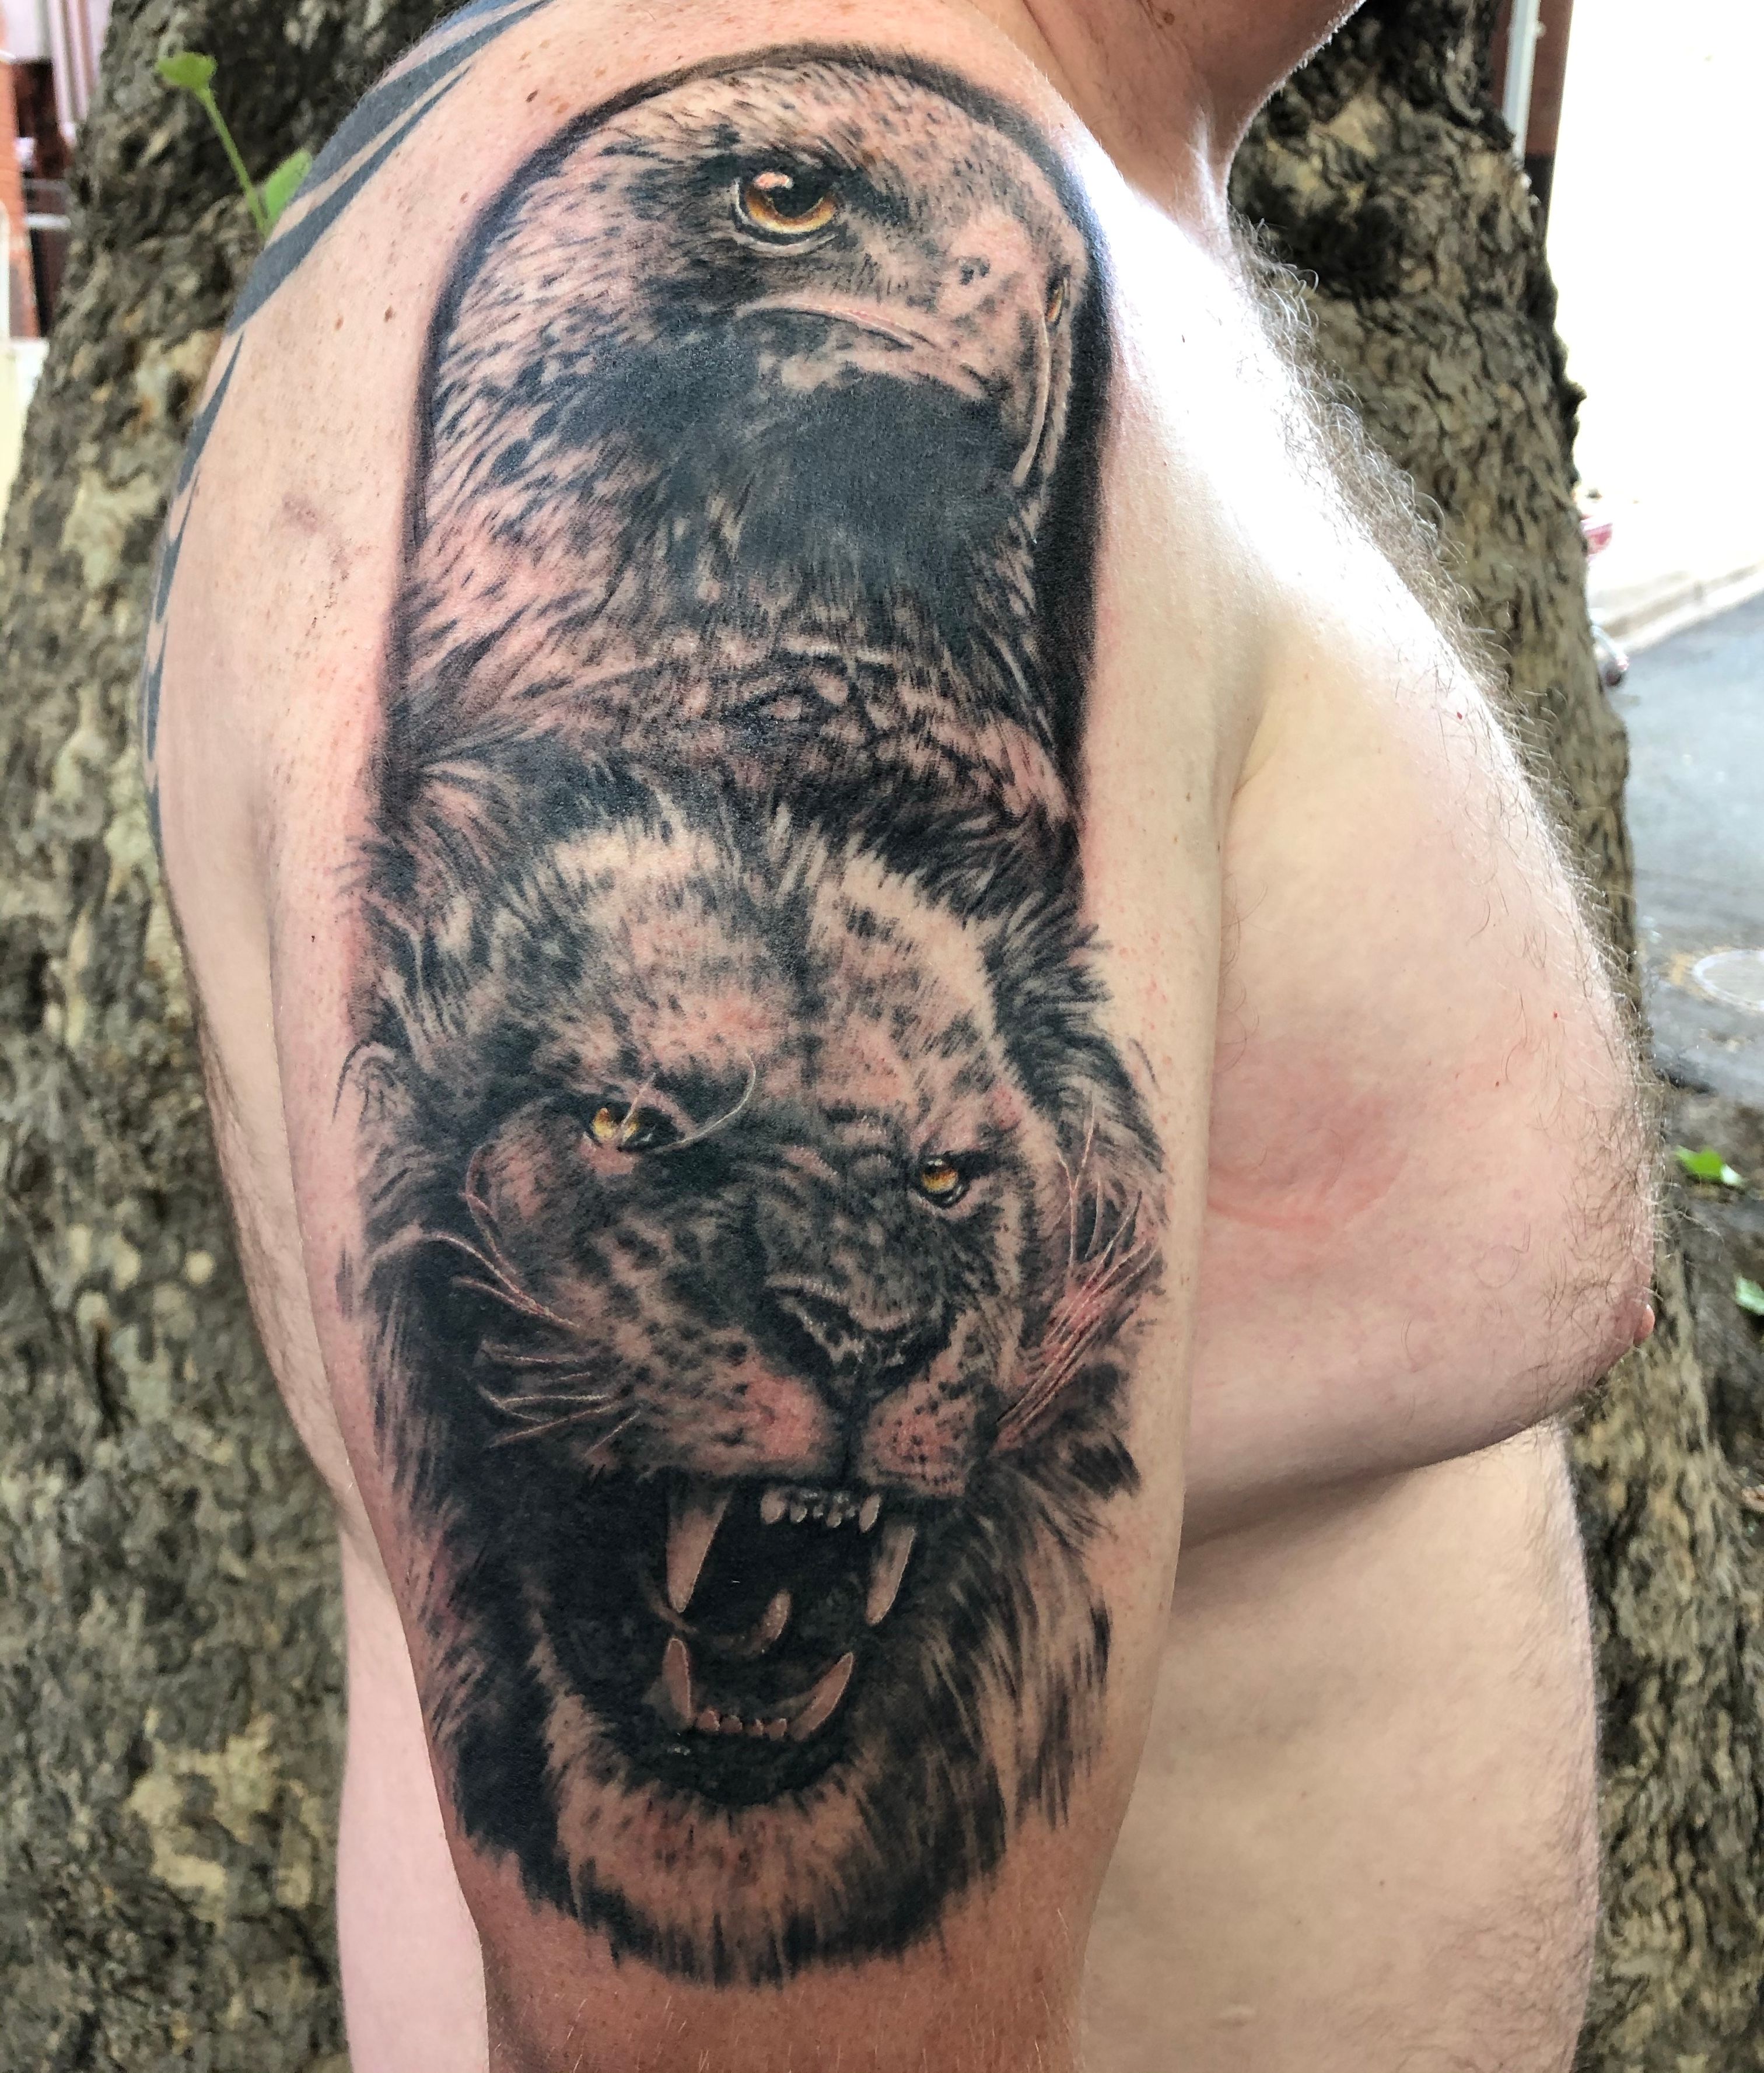 10 Best Lion and Eagle Tattoo Designs  PetPress  Eagle tattoo Lion  tattoo Mens lion tattoo